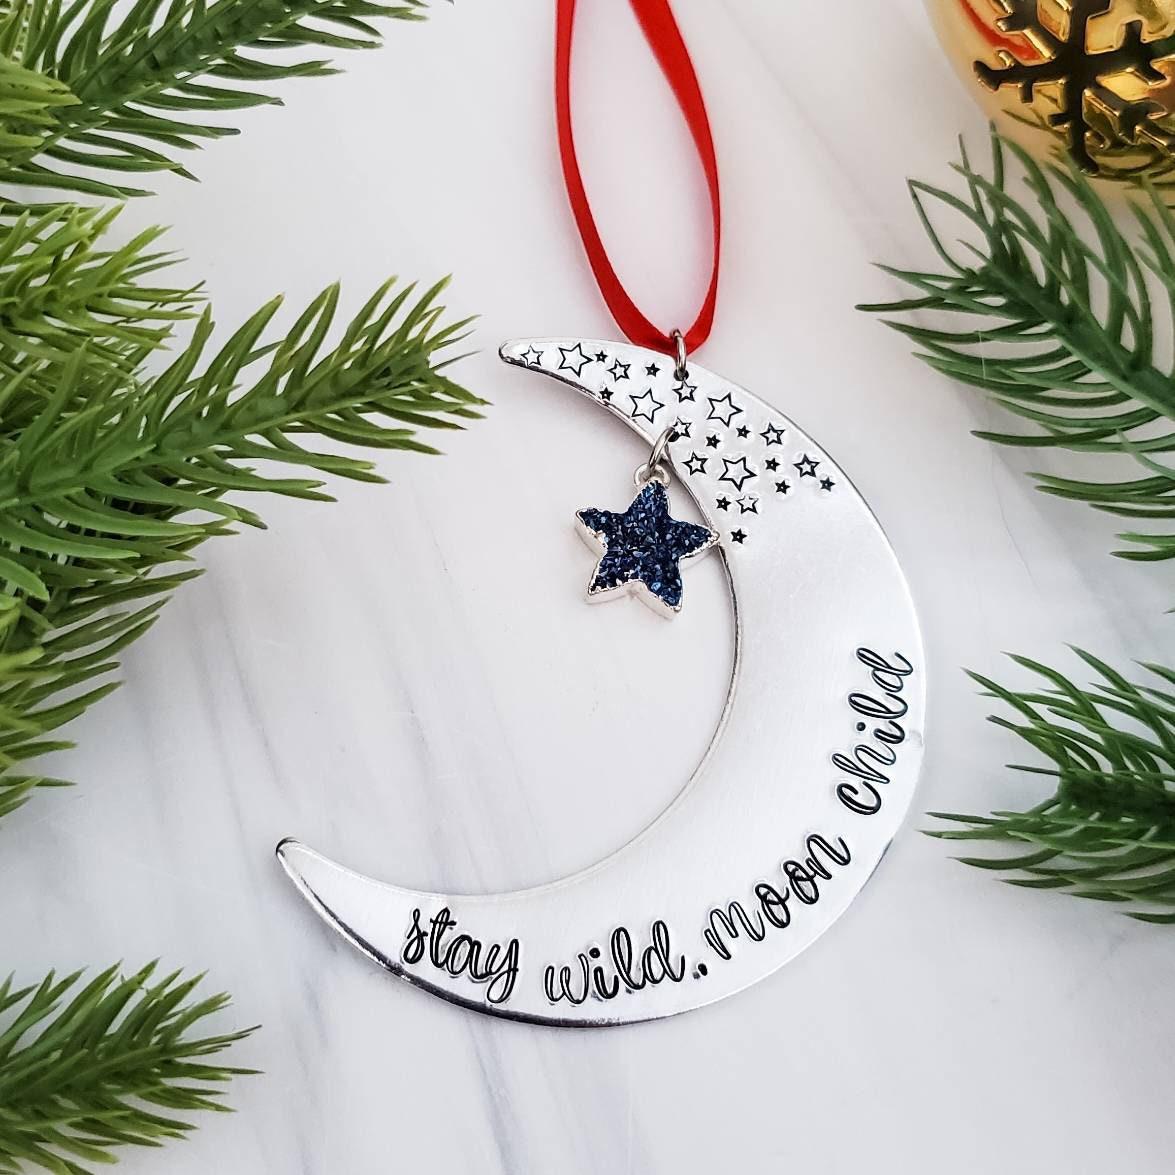 Stay Wild Moon Child Christmas Ornament Salt and Sparkle